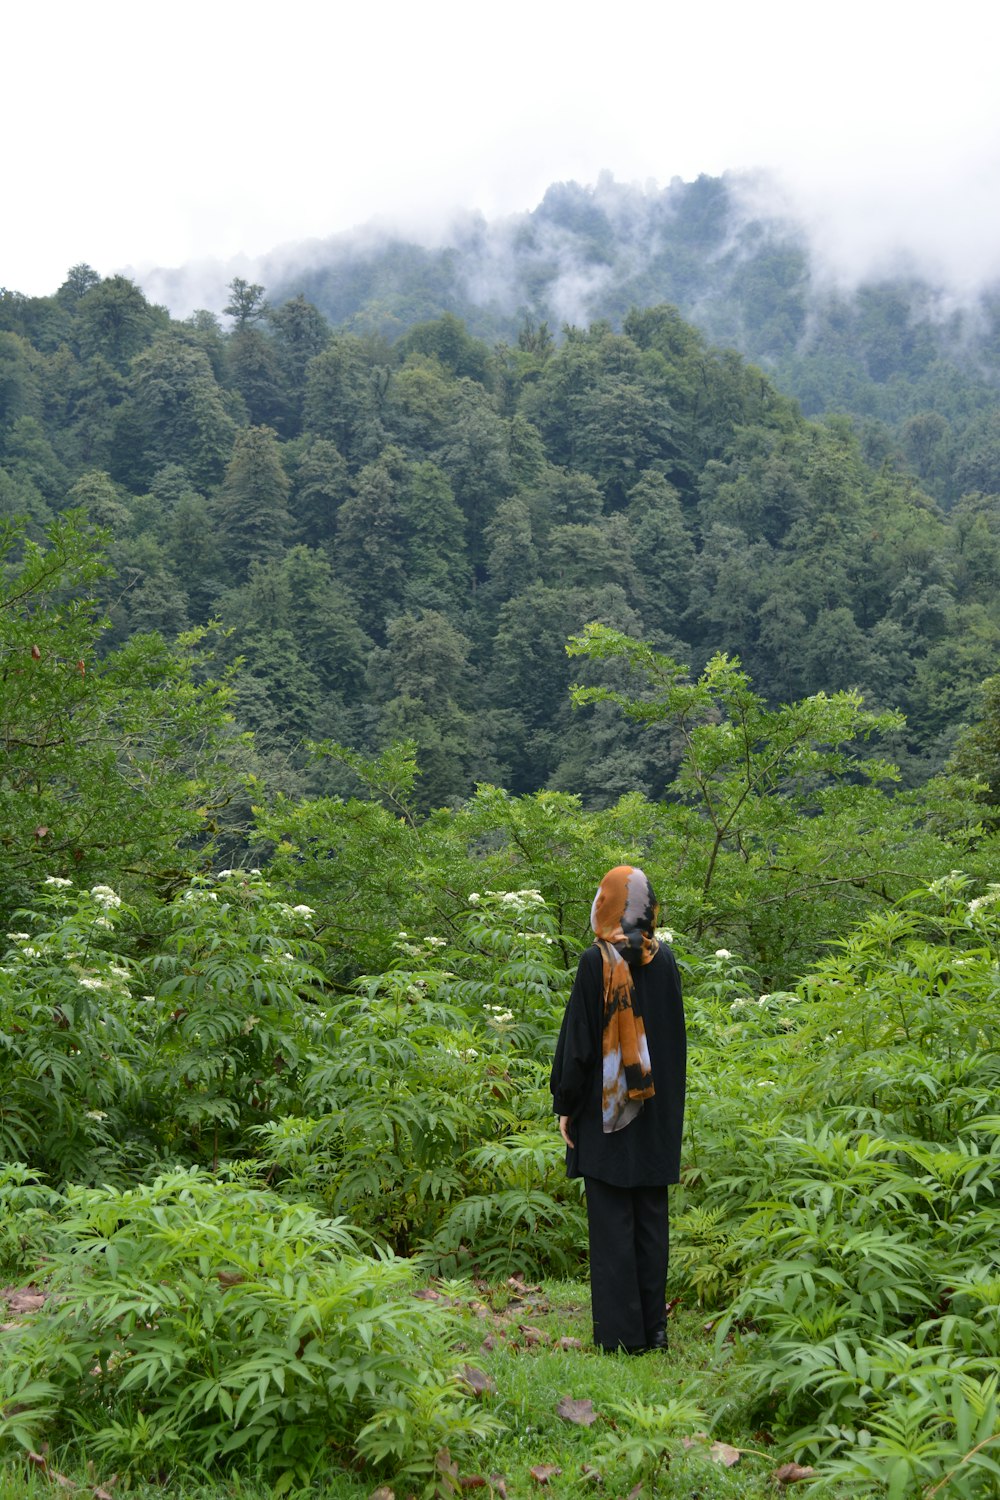 a person standing in the middle of a lush green forest